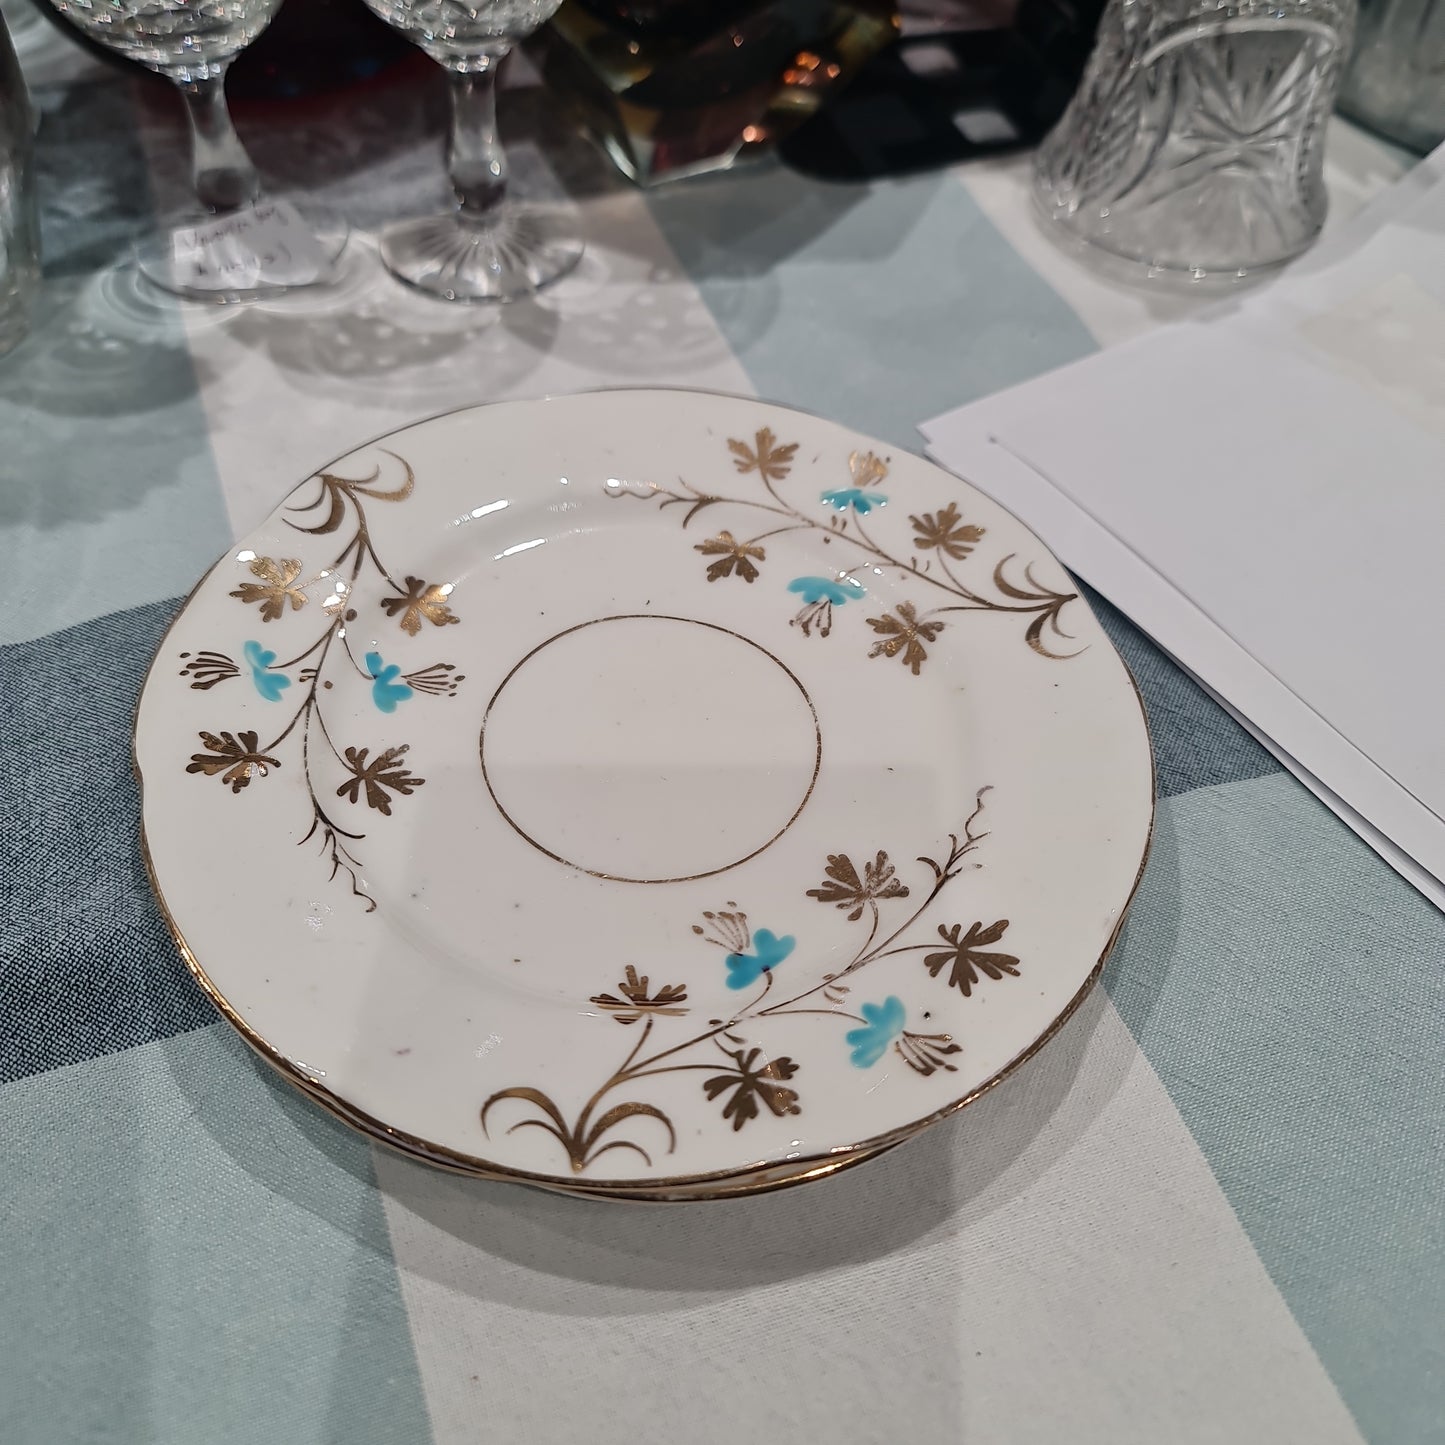 Vintage white and Gold 18 cm plate